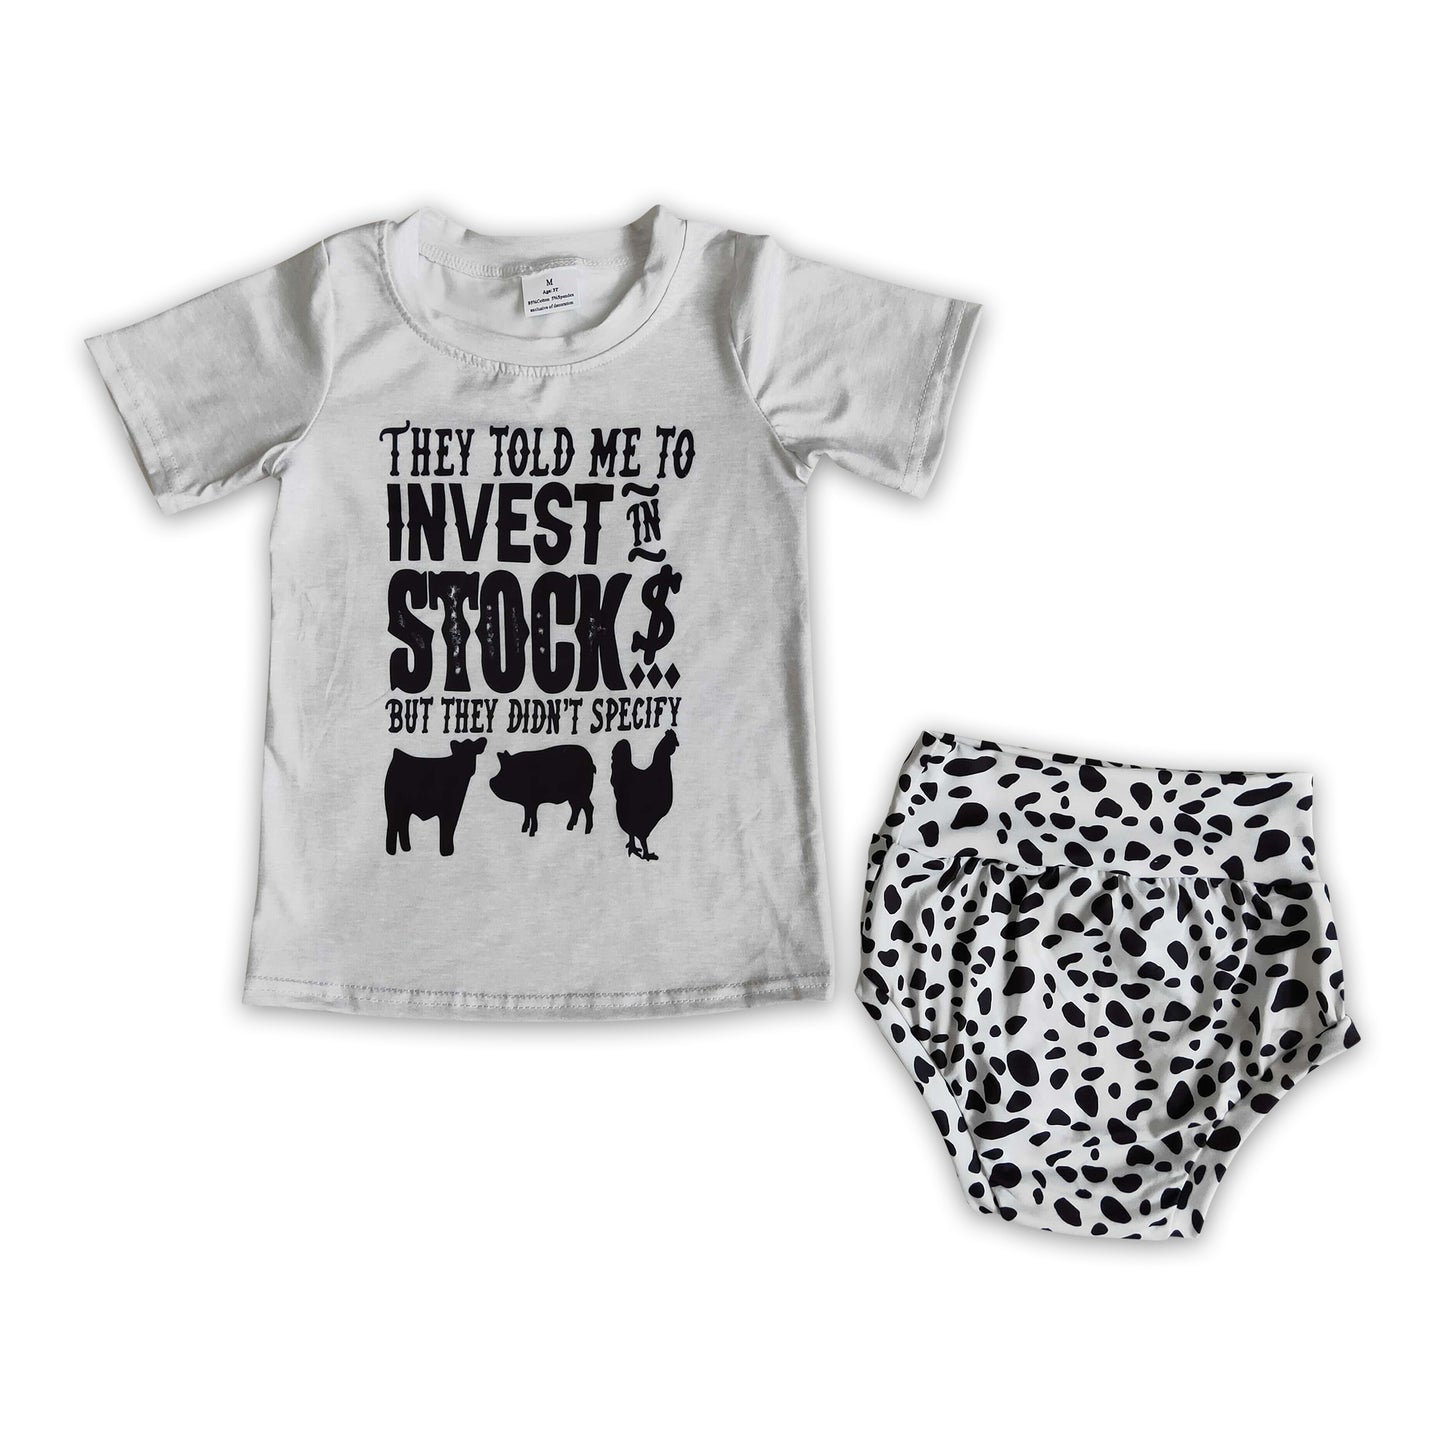 They told me invest in stock but they didn't specify farm baby girls bummies set